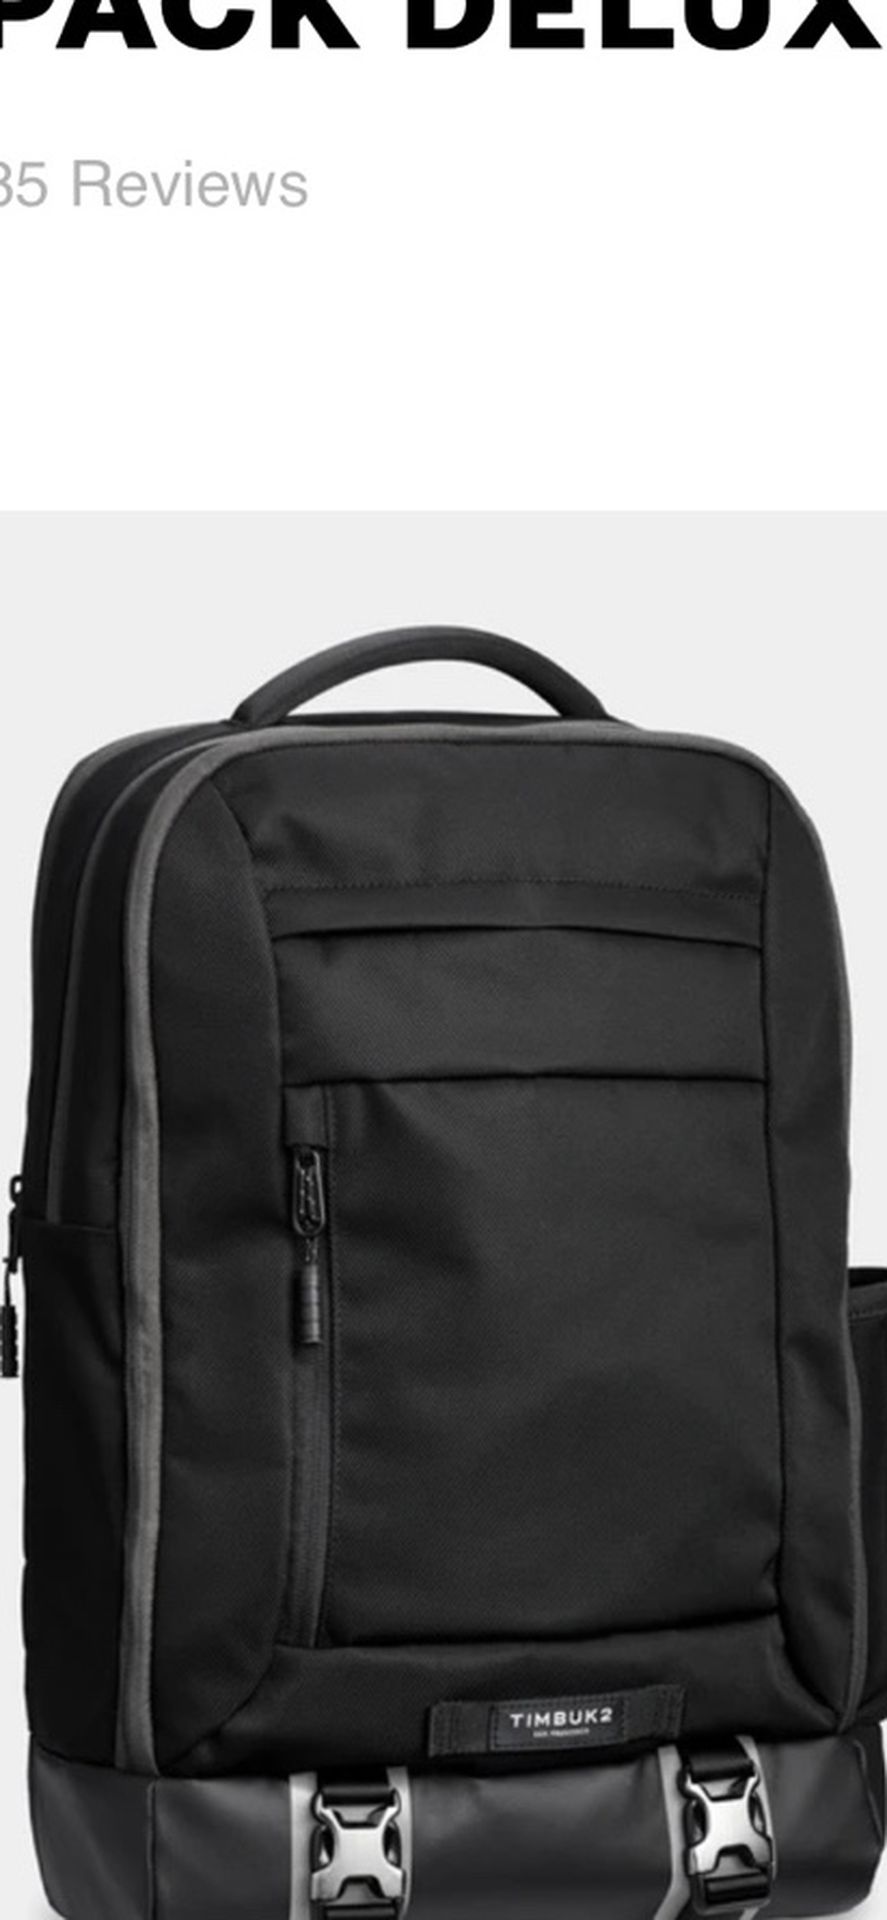 AUTHORITY LAPTOP BACKPACK DELUXE | NEW!